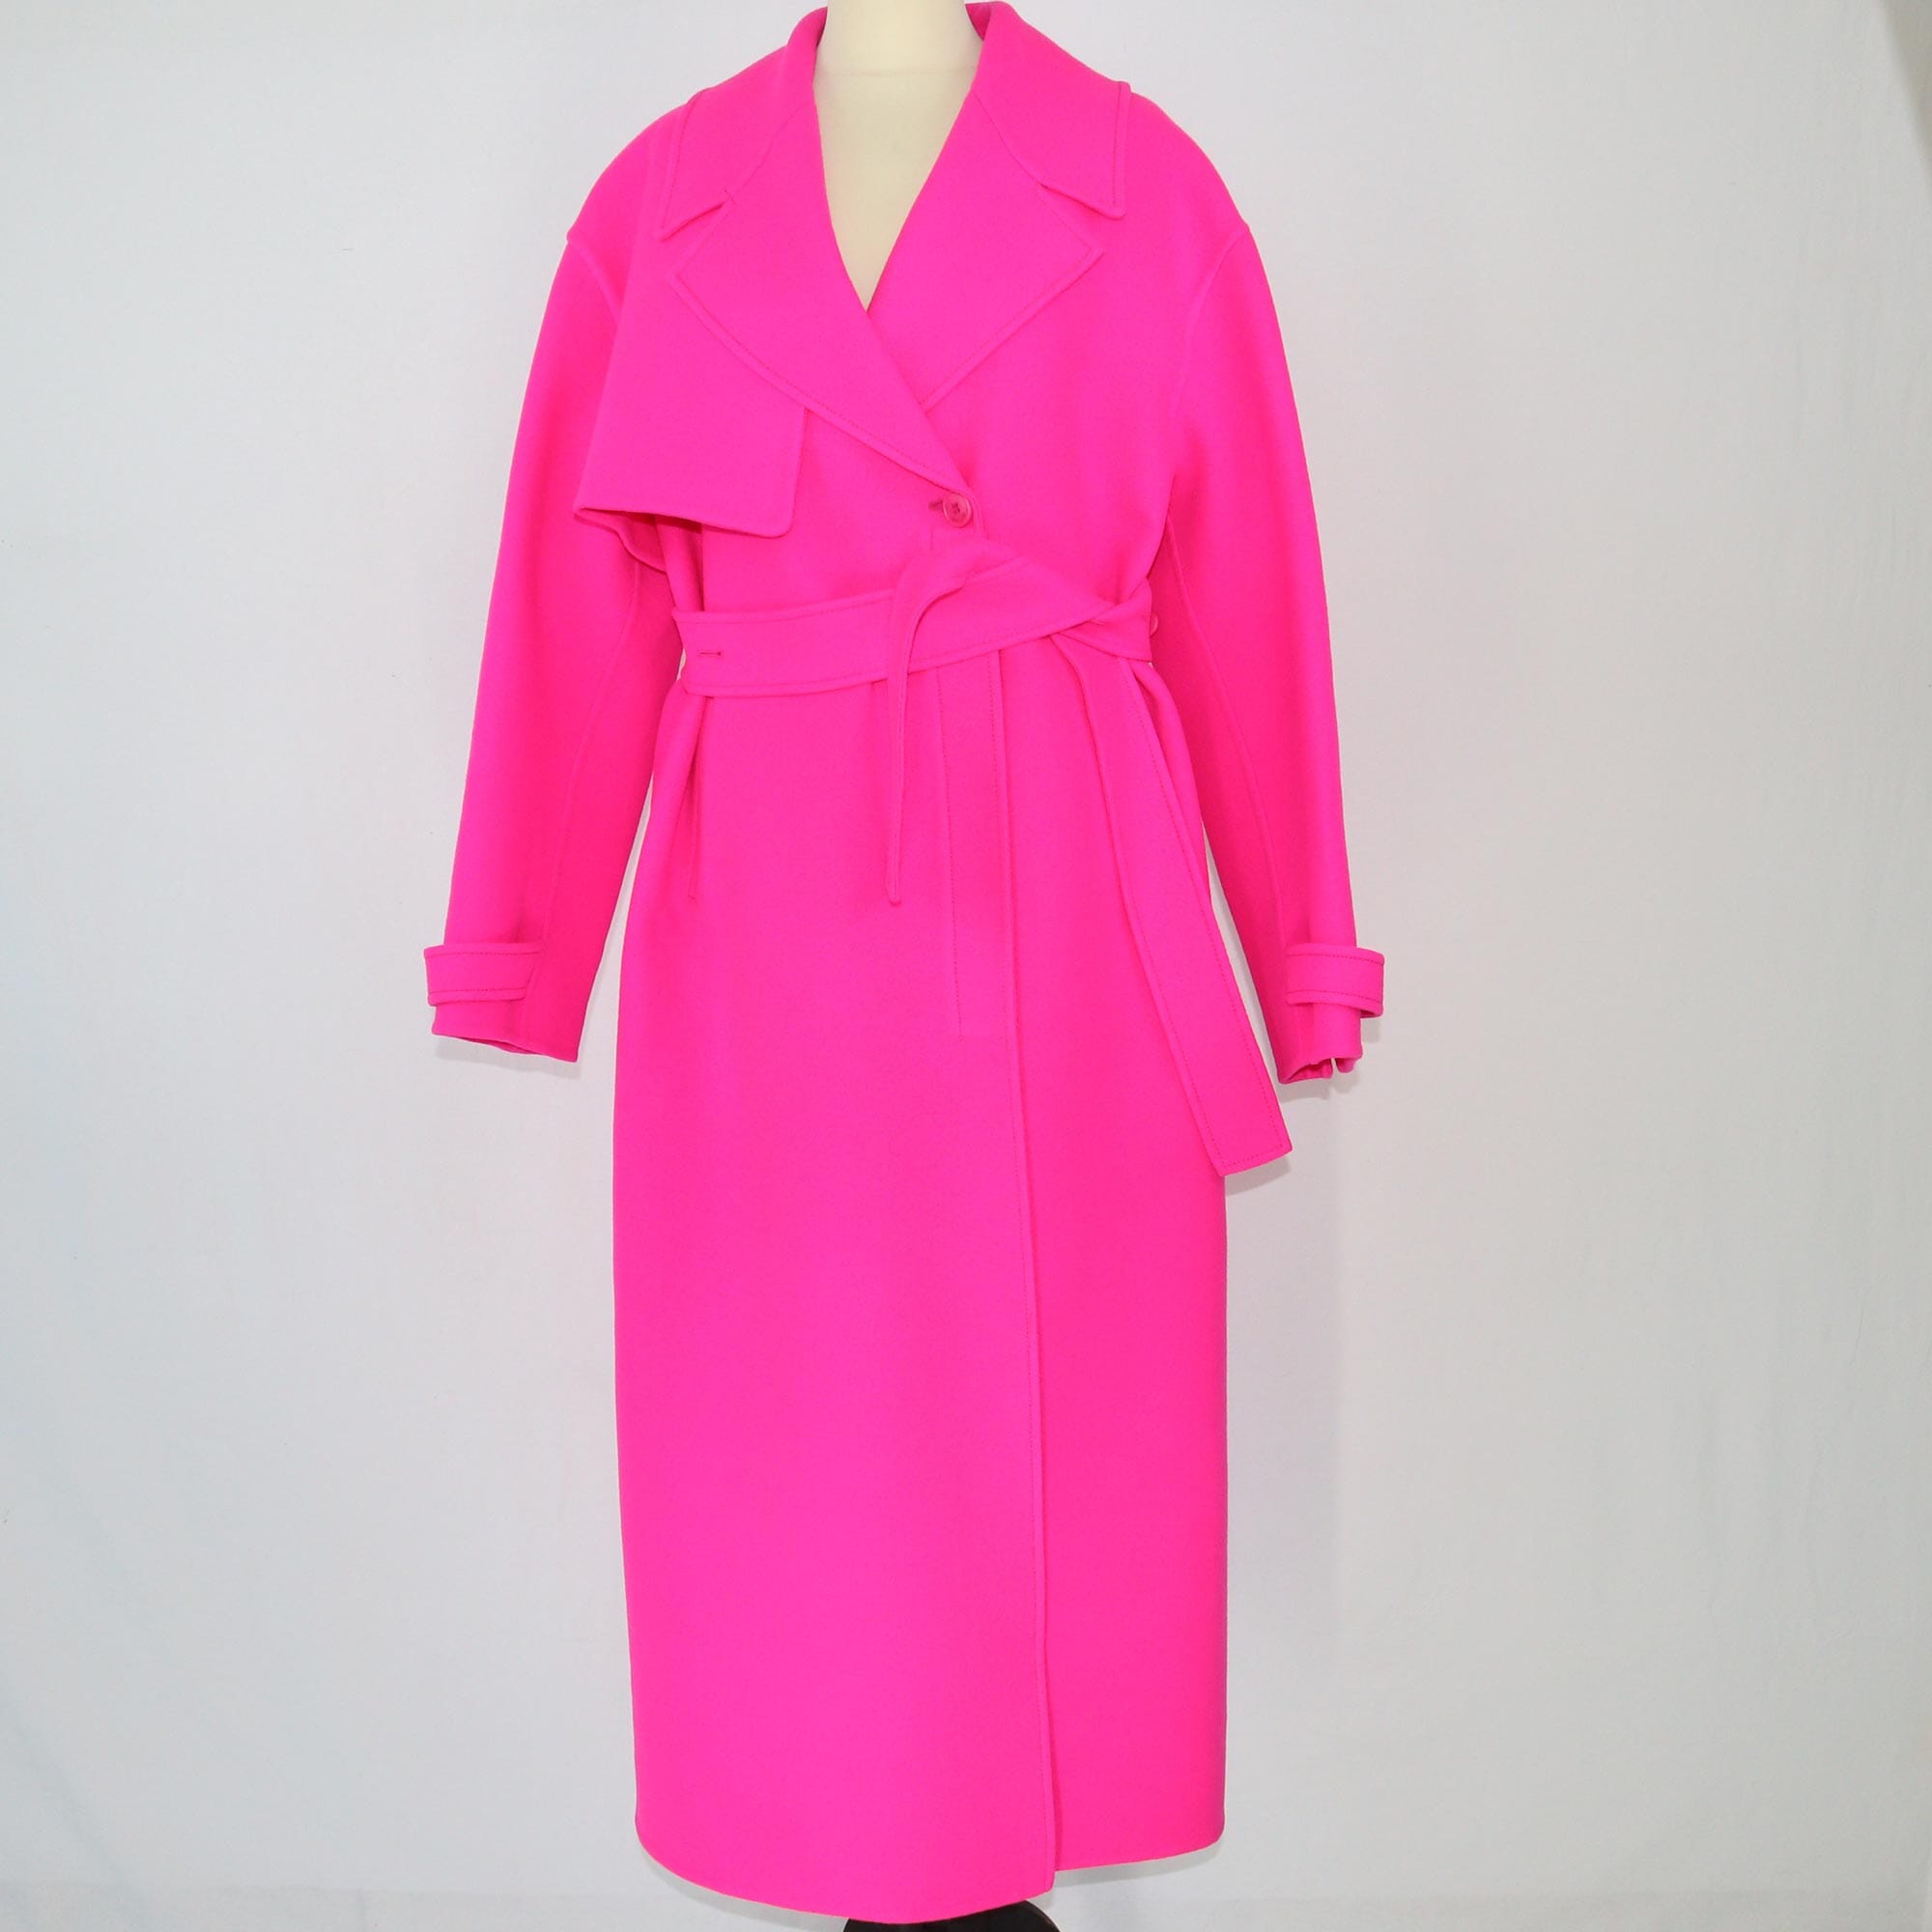 Jacquemus Neon Pink Oversized Trench Coat Clothing Jacquemus 